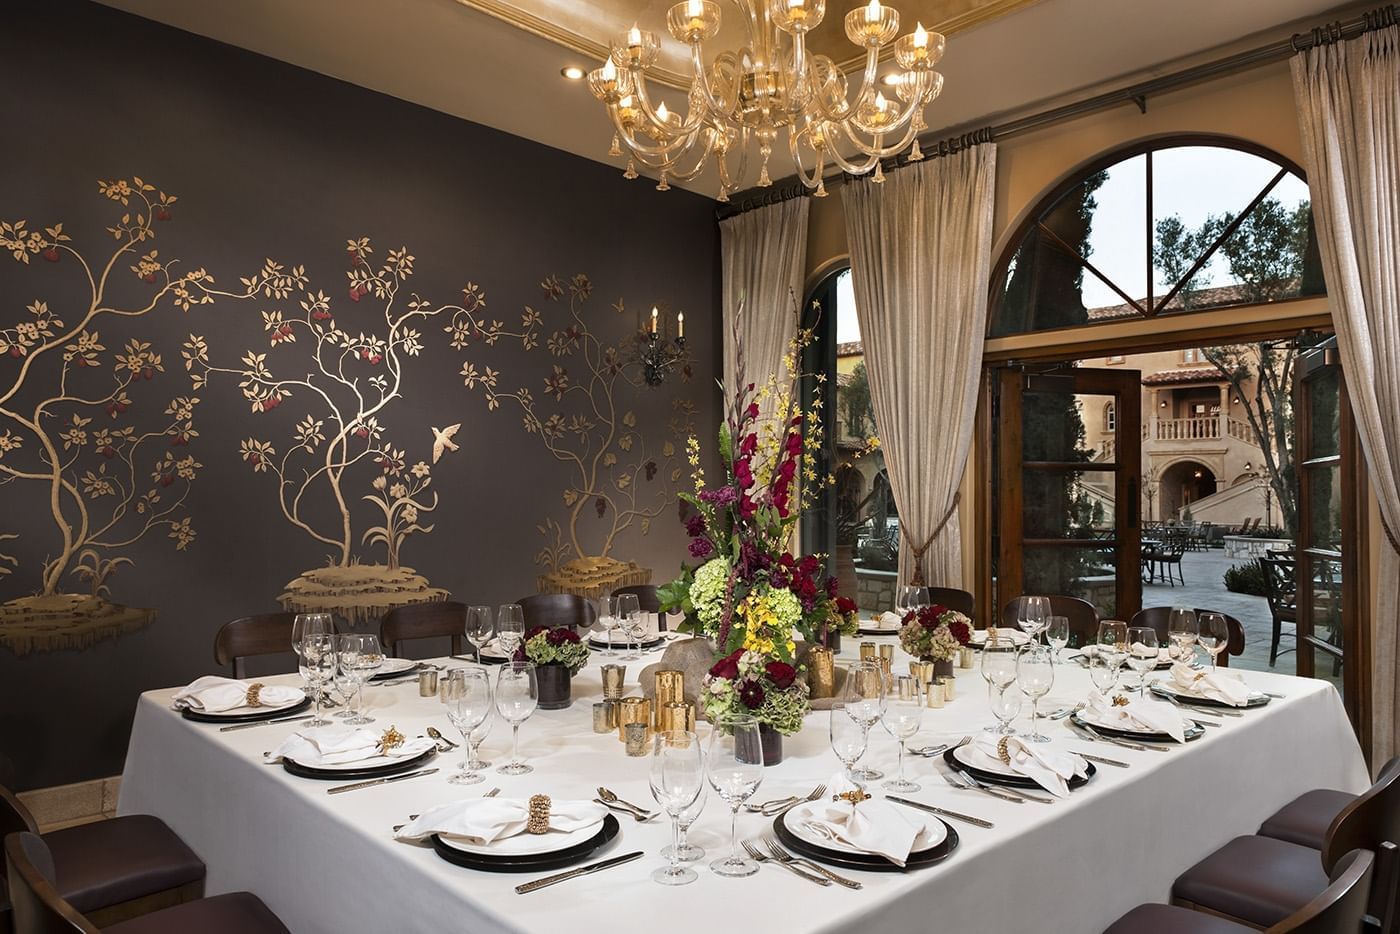 The Murano Private dining room prepared for a party of 14